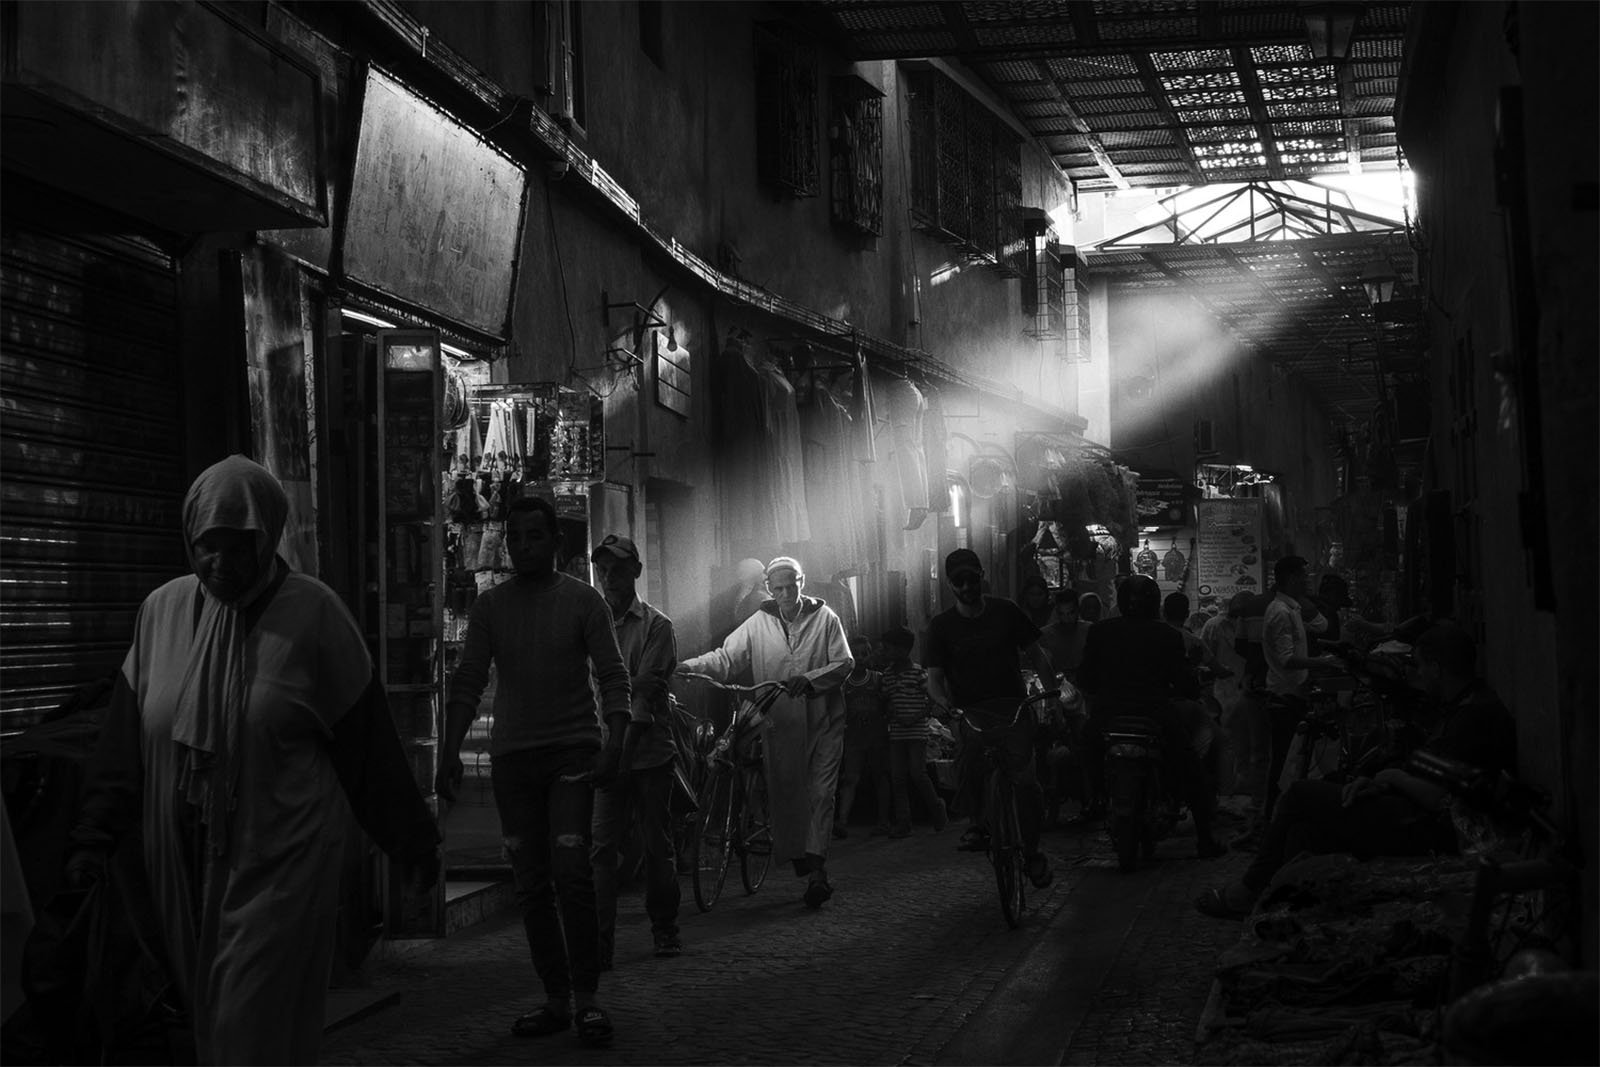 A bustling alley in a marketplace with beams of light streaming through the ceiling. People walk, ride bicycles, and shop at stalls on either side. The scene is in black and white, highlighting the lively yet serene atmosphere of the market.